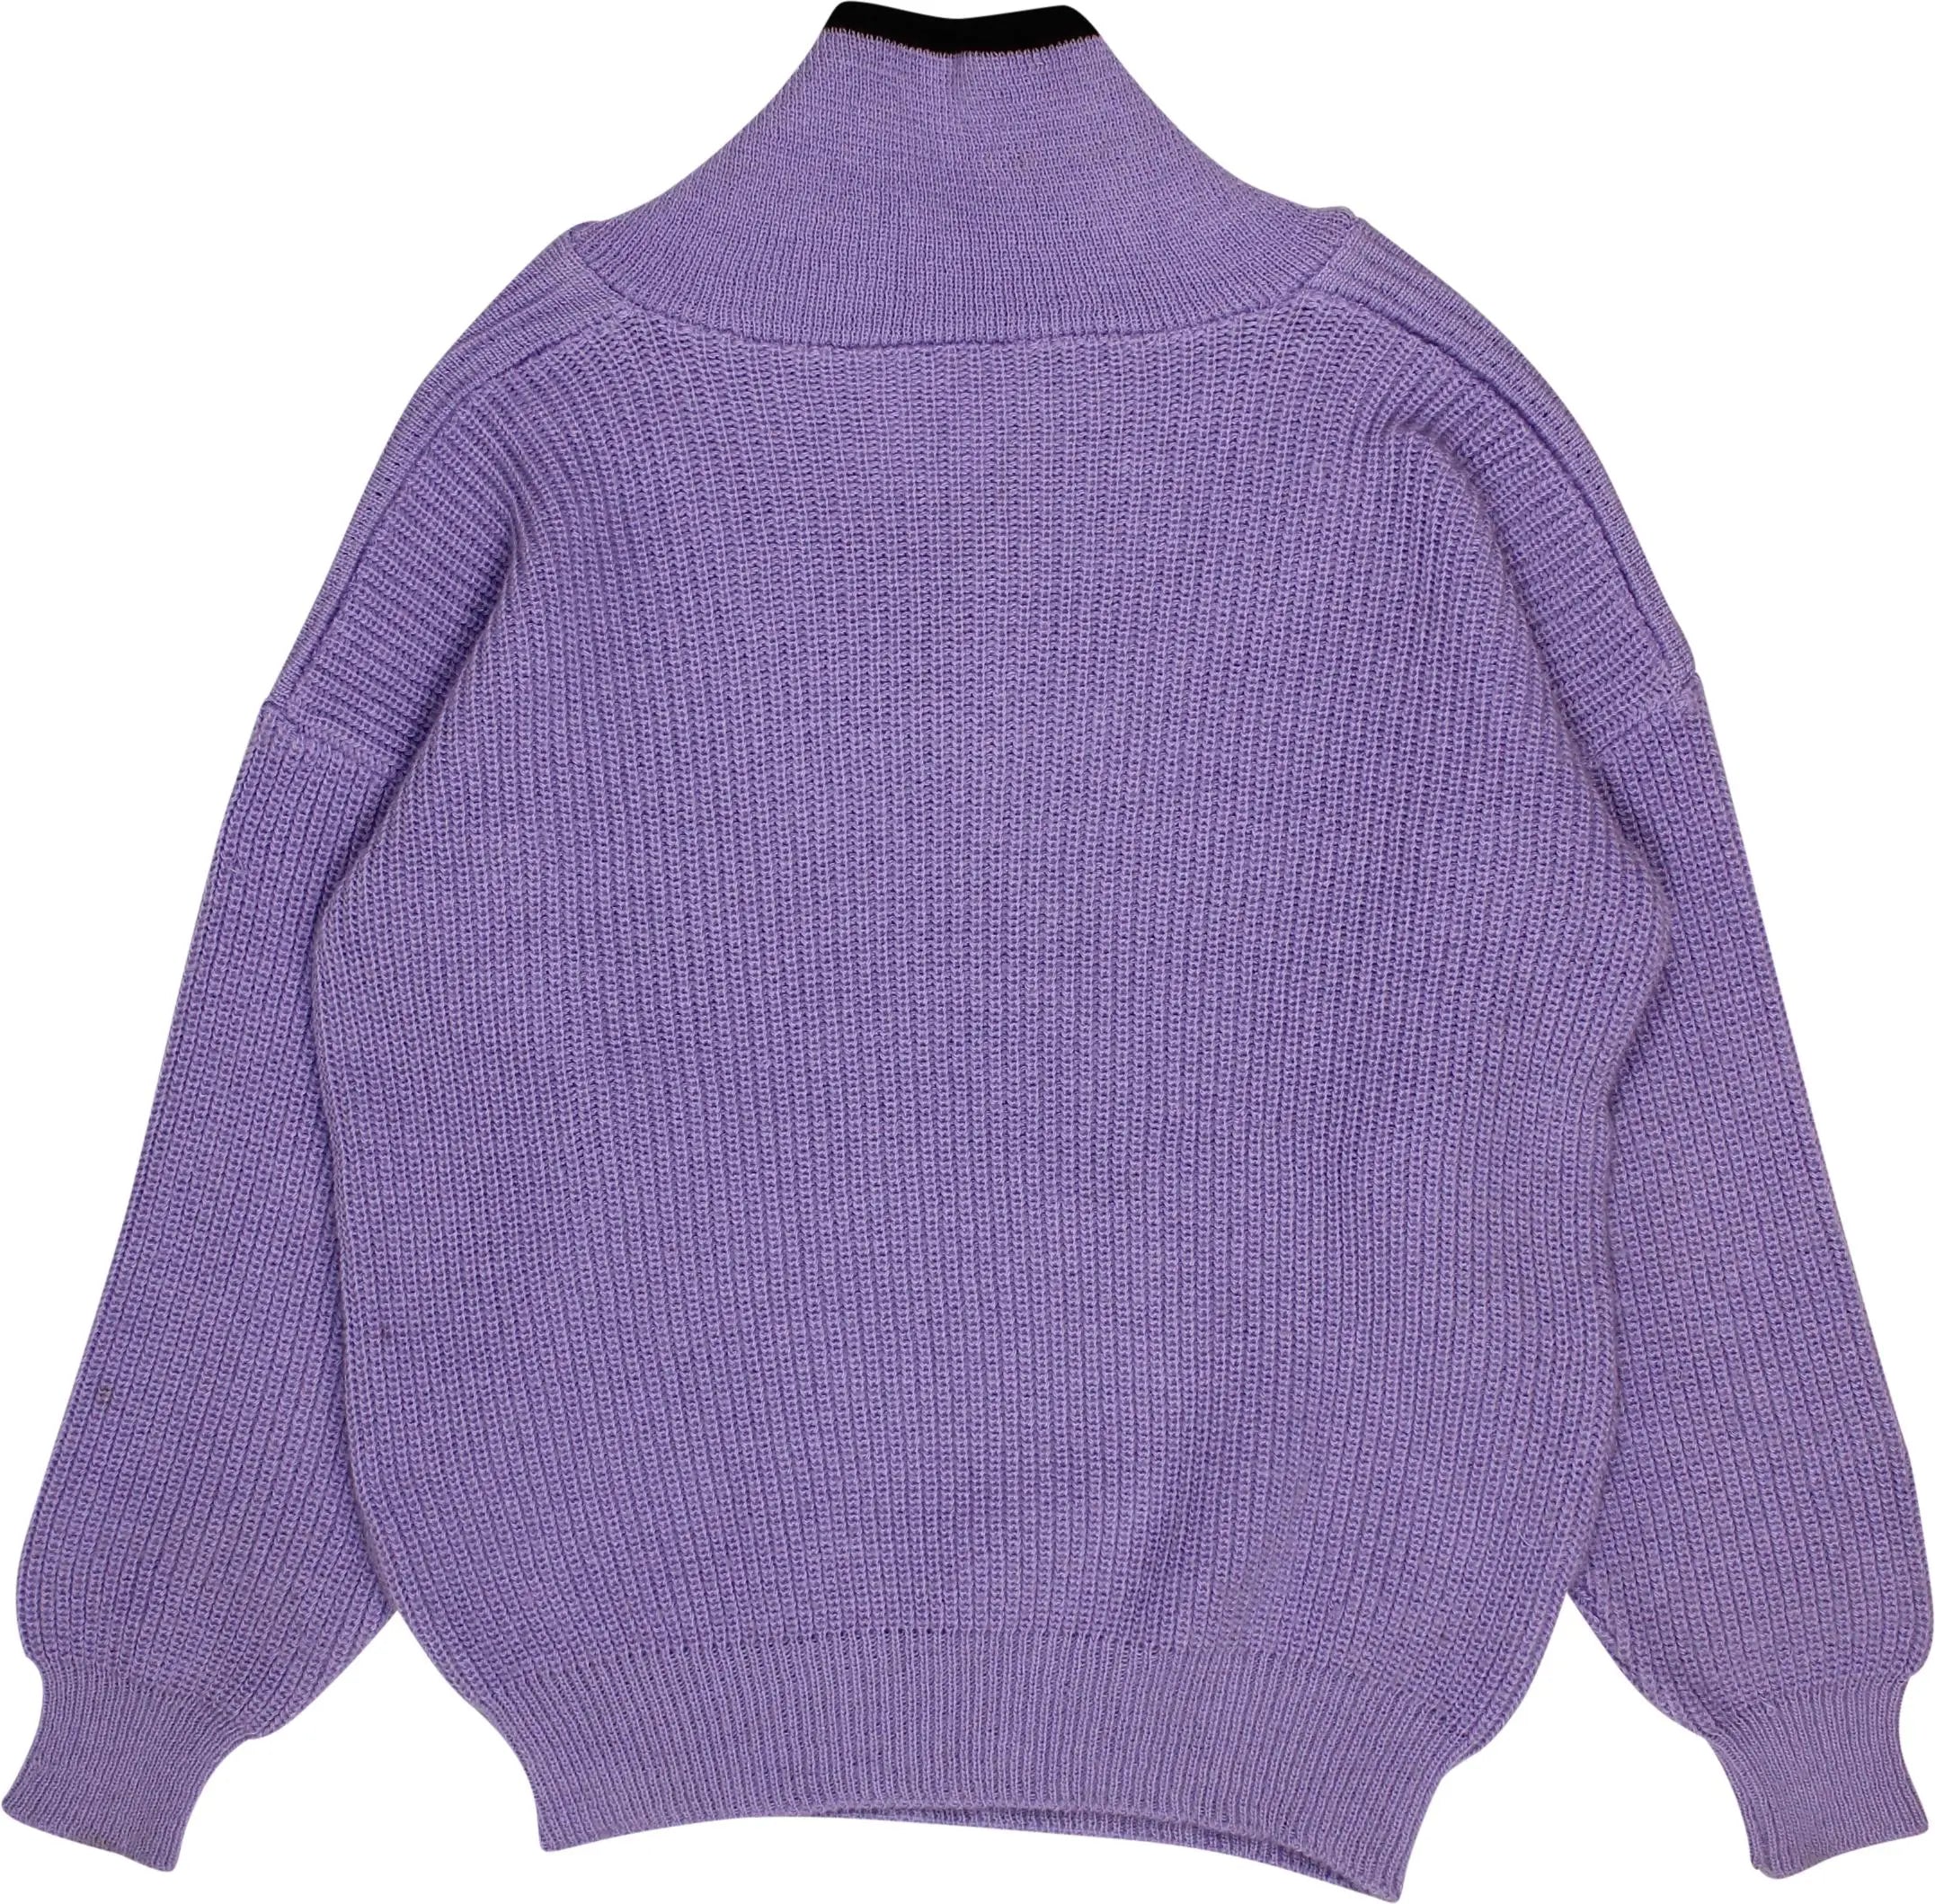 Unknown - Purple V-neck Jumper- ThriftTale.com - Vintage and second handclothing